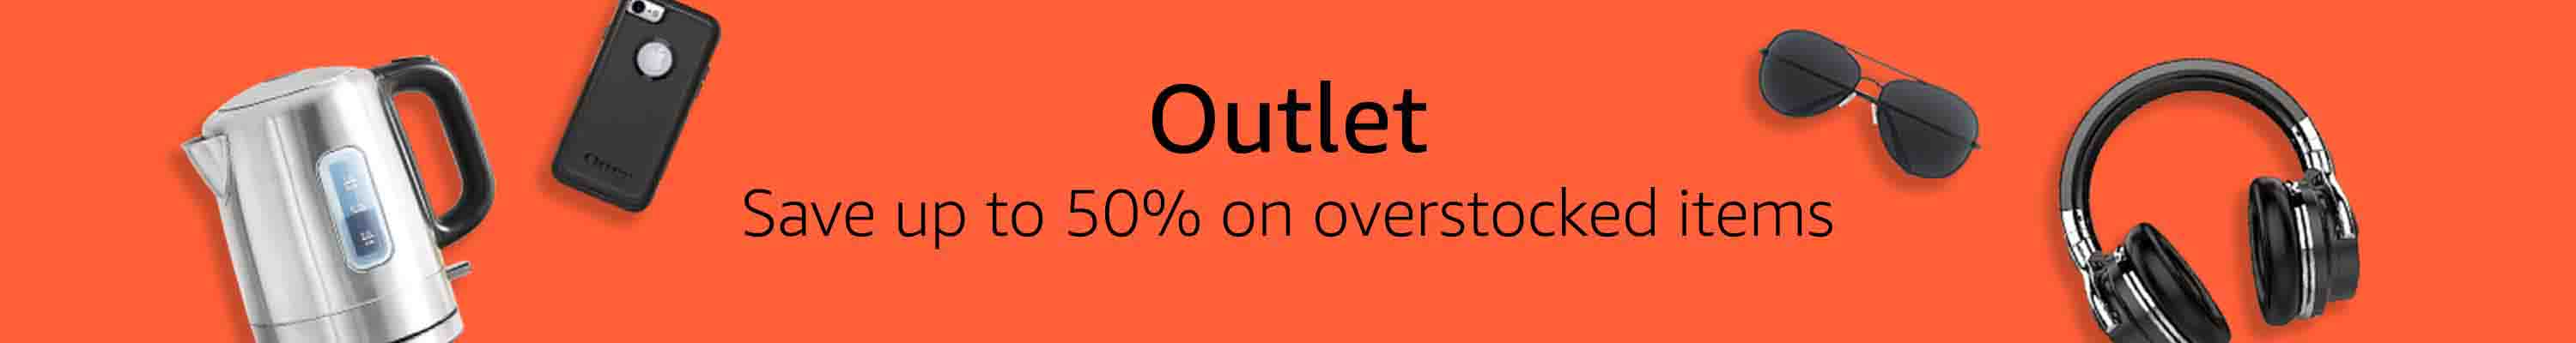 Amazon outlet store overstock deals – Always Promo Off